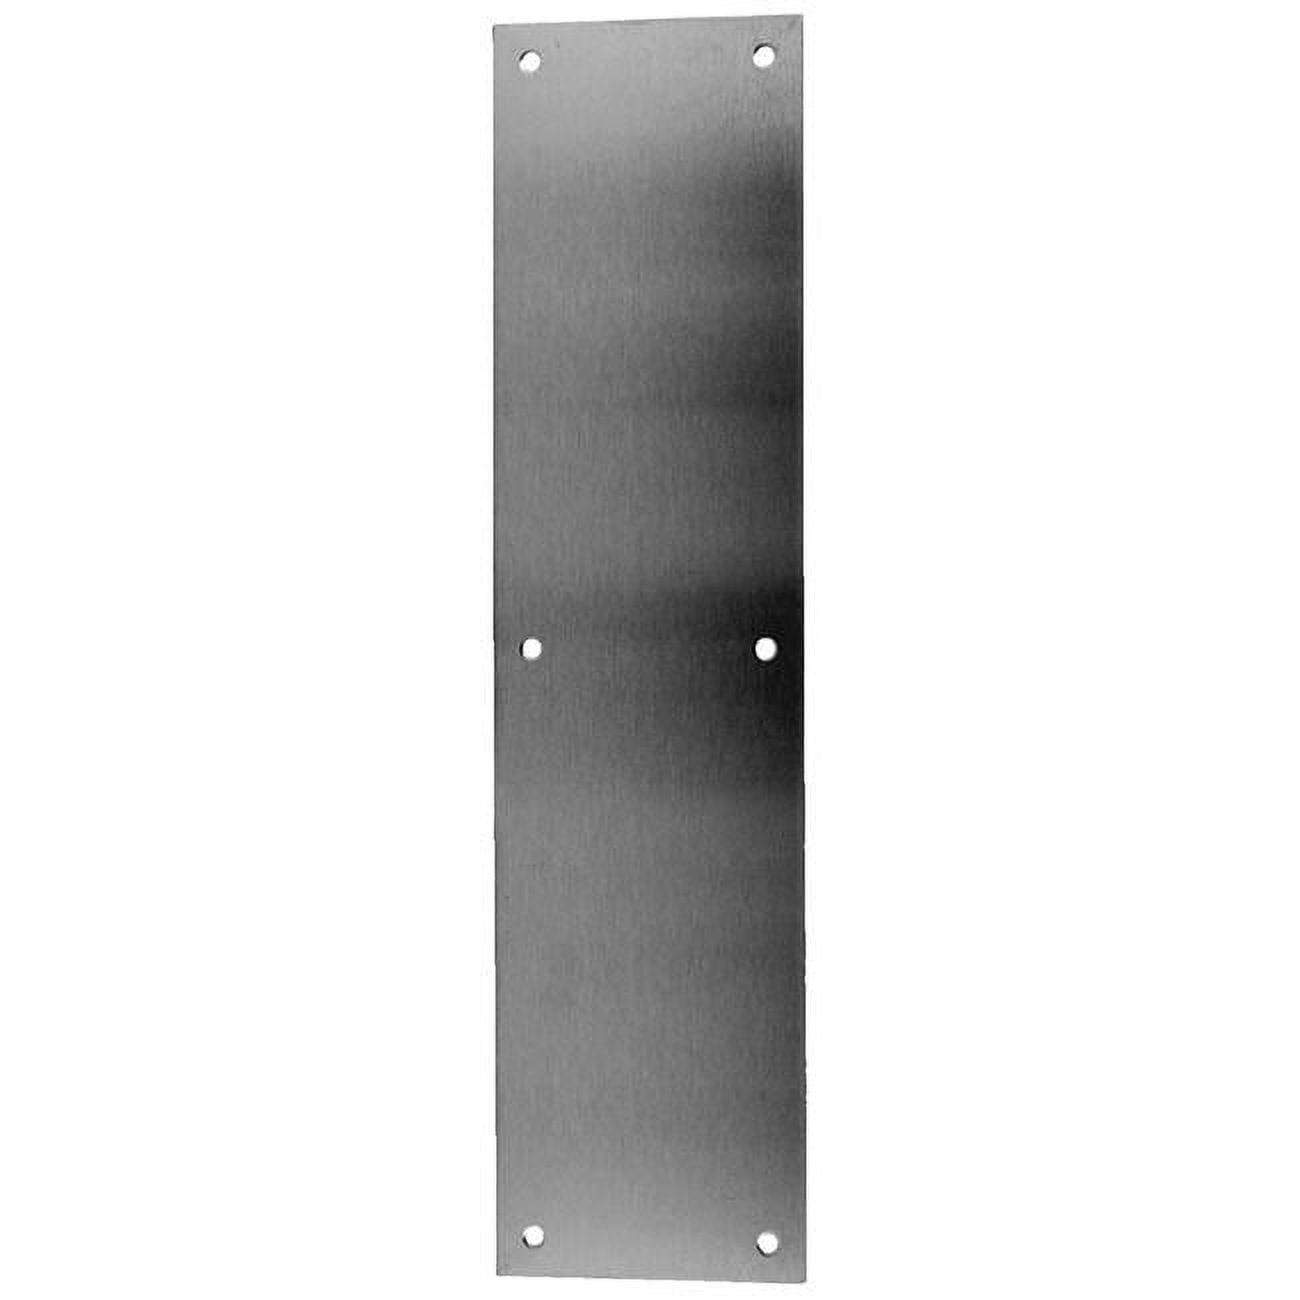 Picture of Don-Jo Manufacturing 72-628 6 x 16 in. Aluminum Push Plate